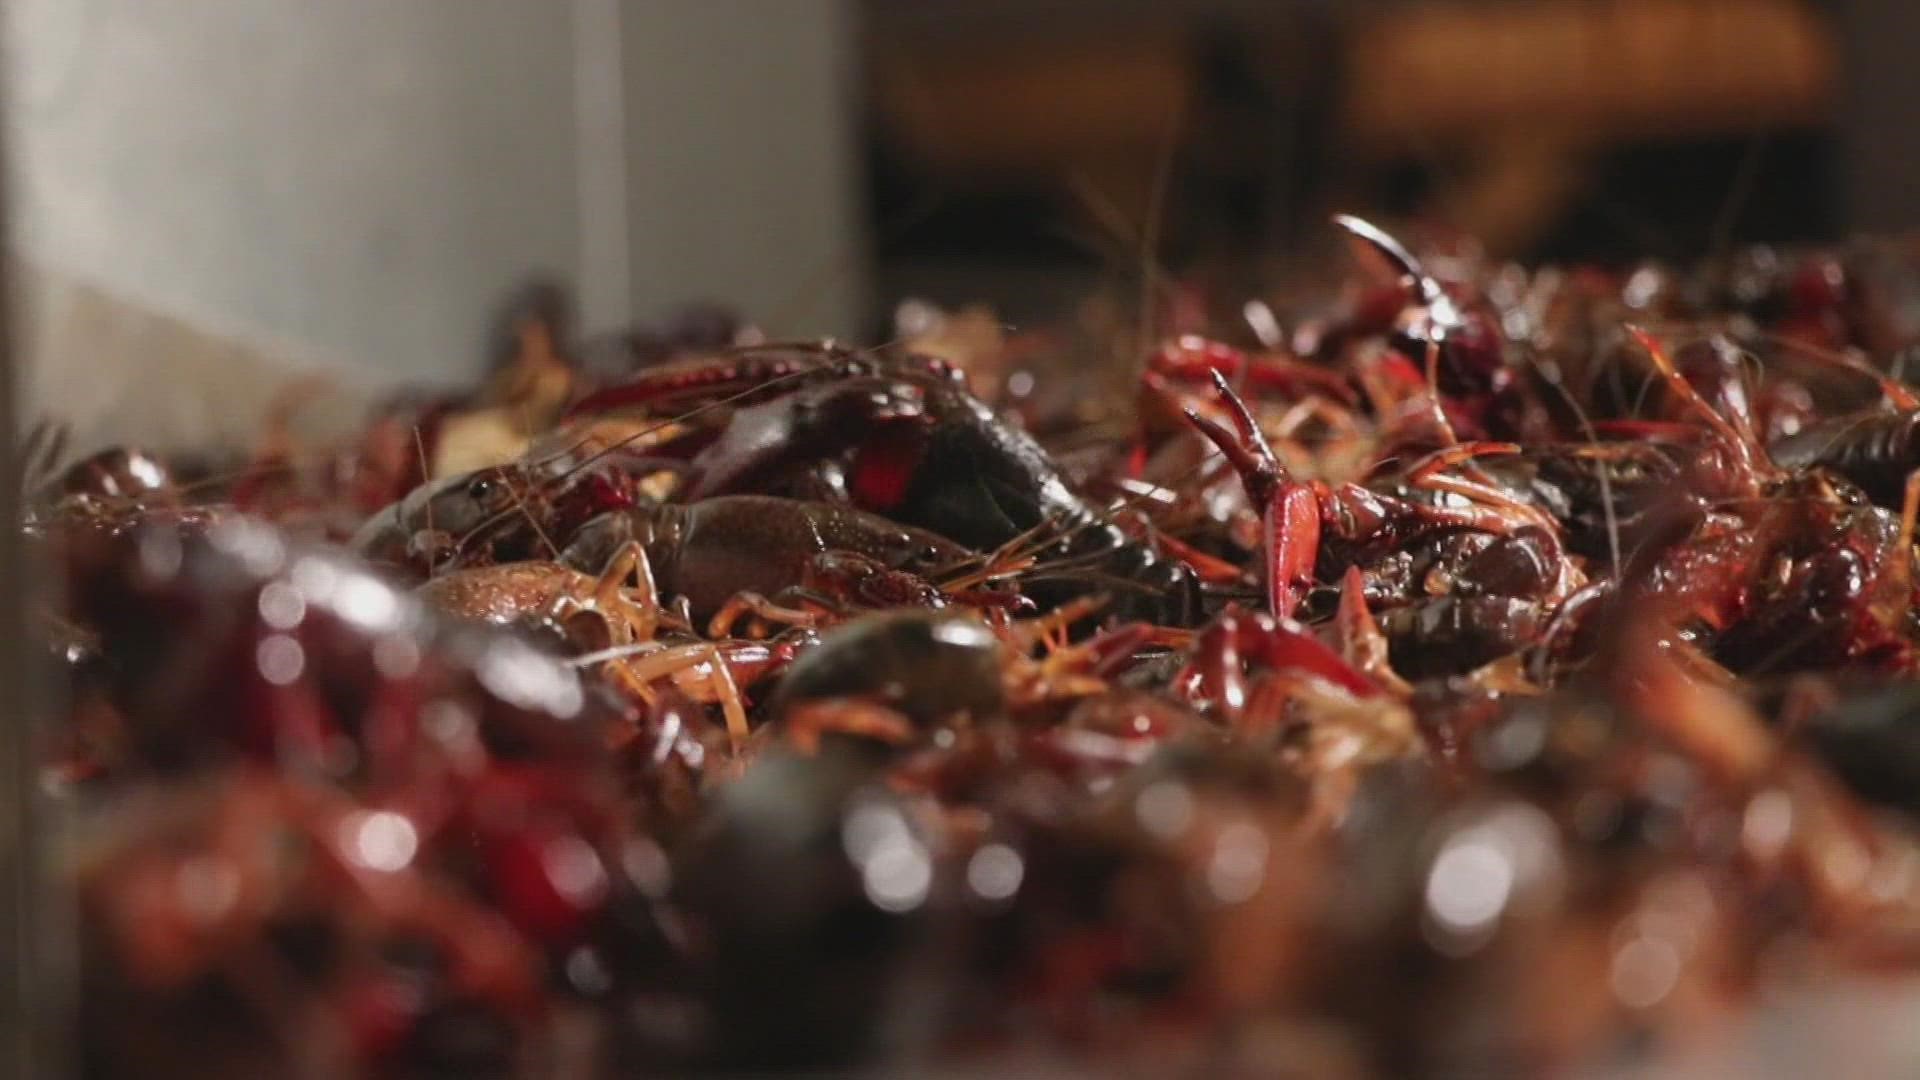 Experts say with fewer crawfish on the market, prices are going to skyrocket.